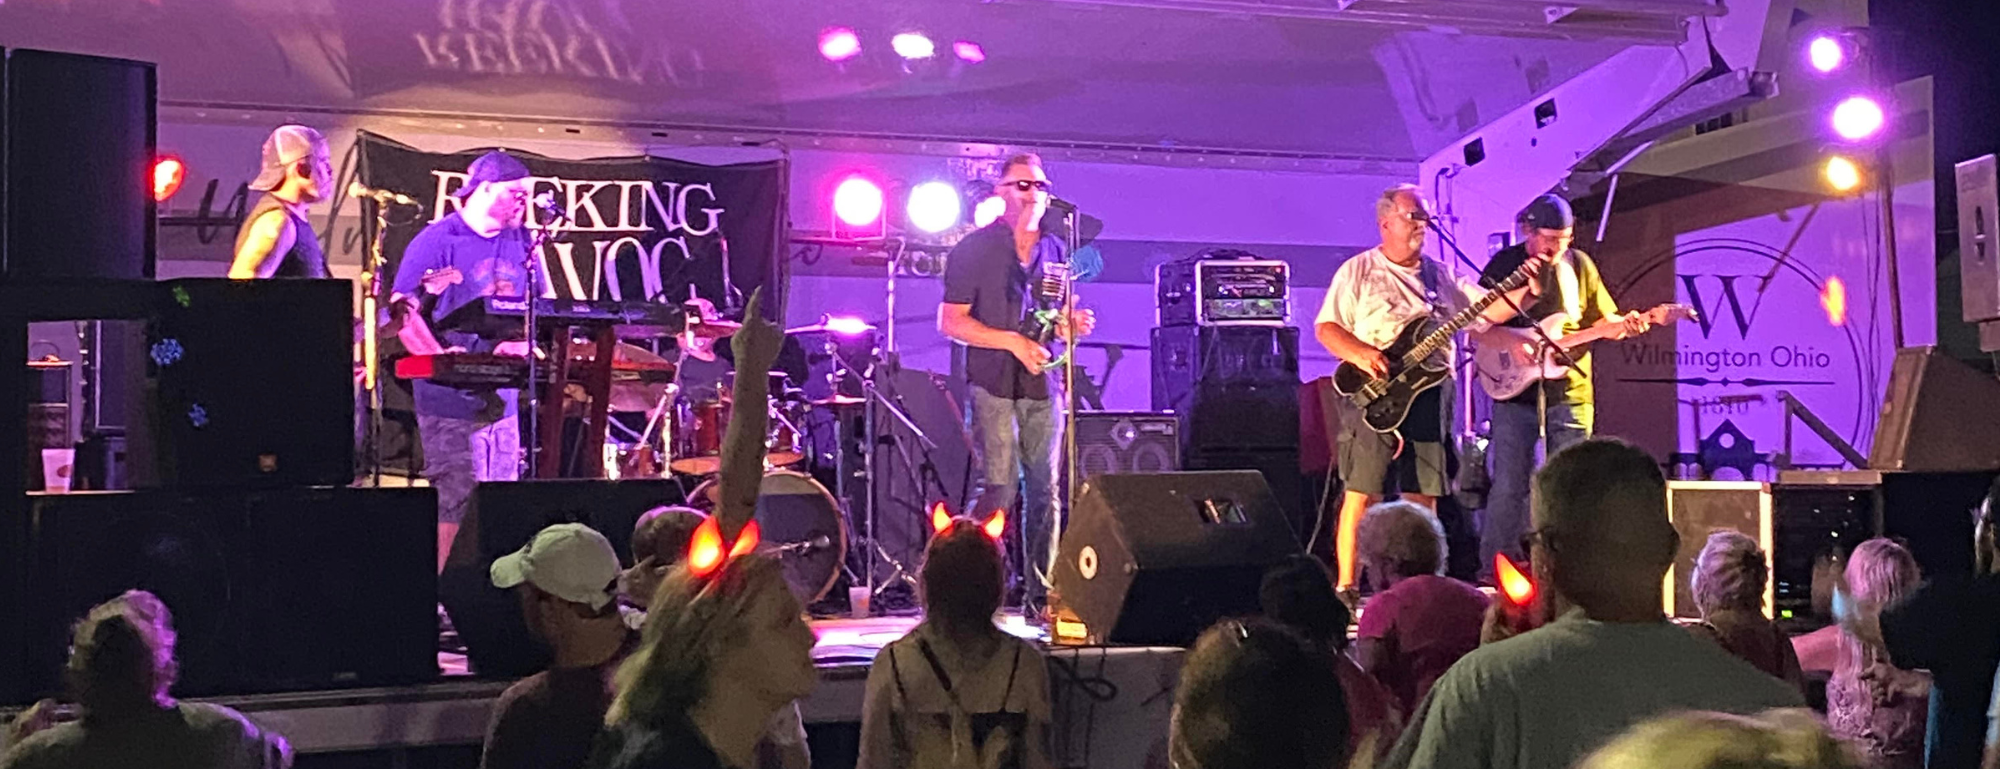 Tri County Battle of the Bands returning for year 2